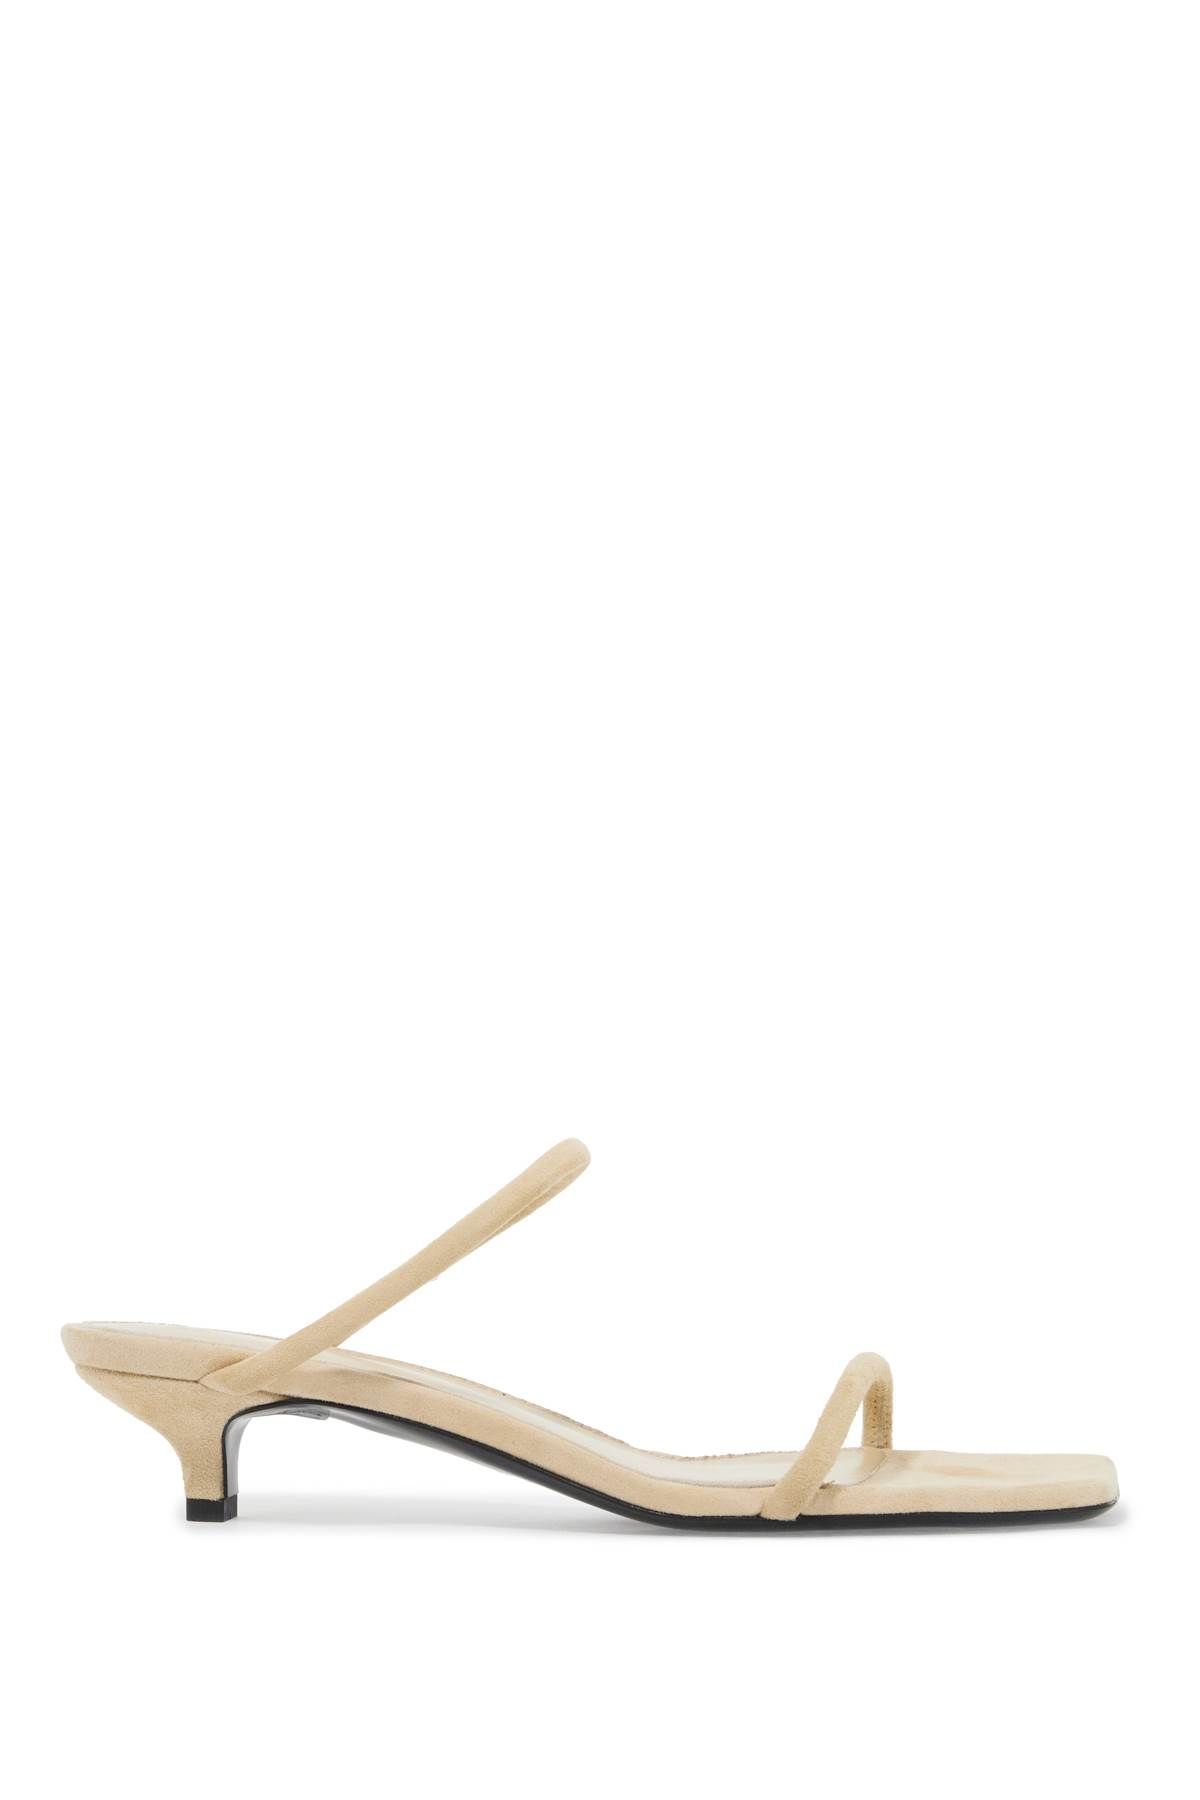 Toteme TOTEME minimalist suede leather sandals